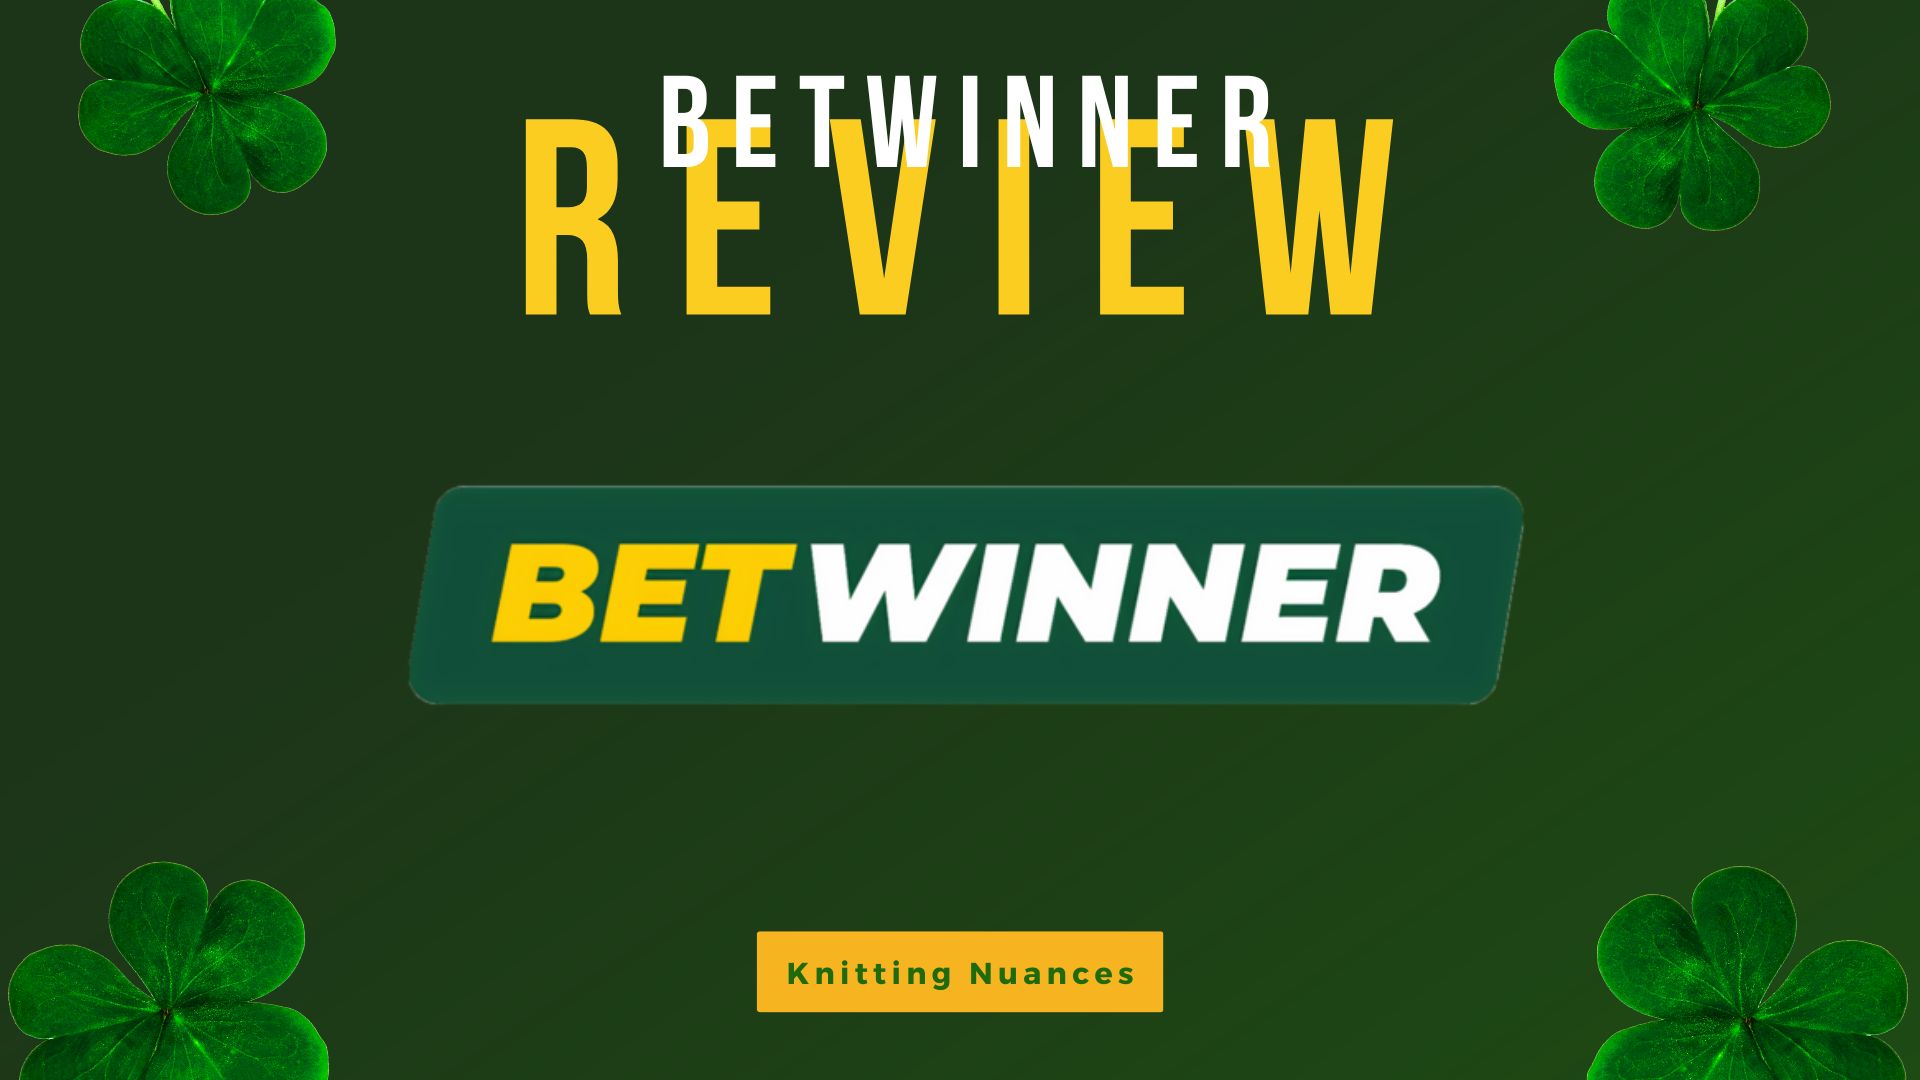 Betwinner APK Once, Betwinner APK Twice: 3 Reasons Why You Shouldn't Betwinner APK The Third Time